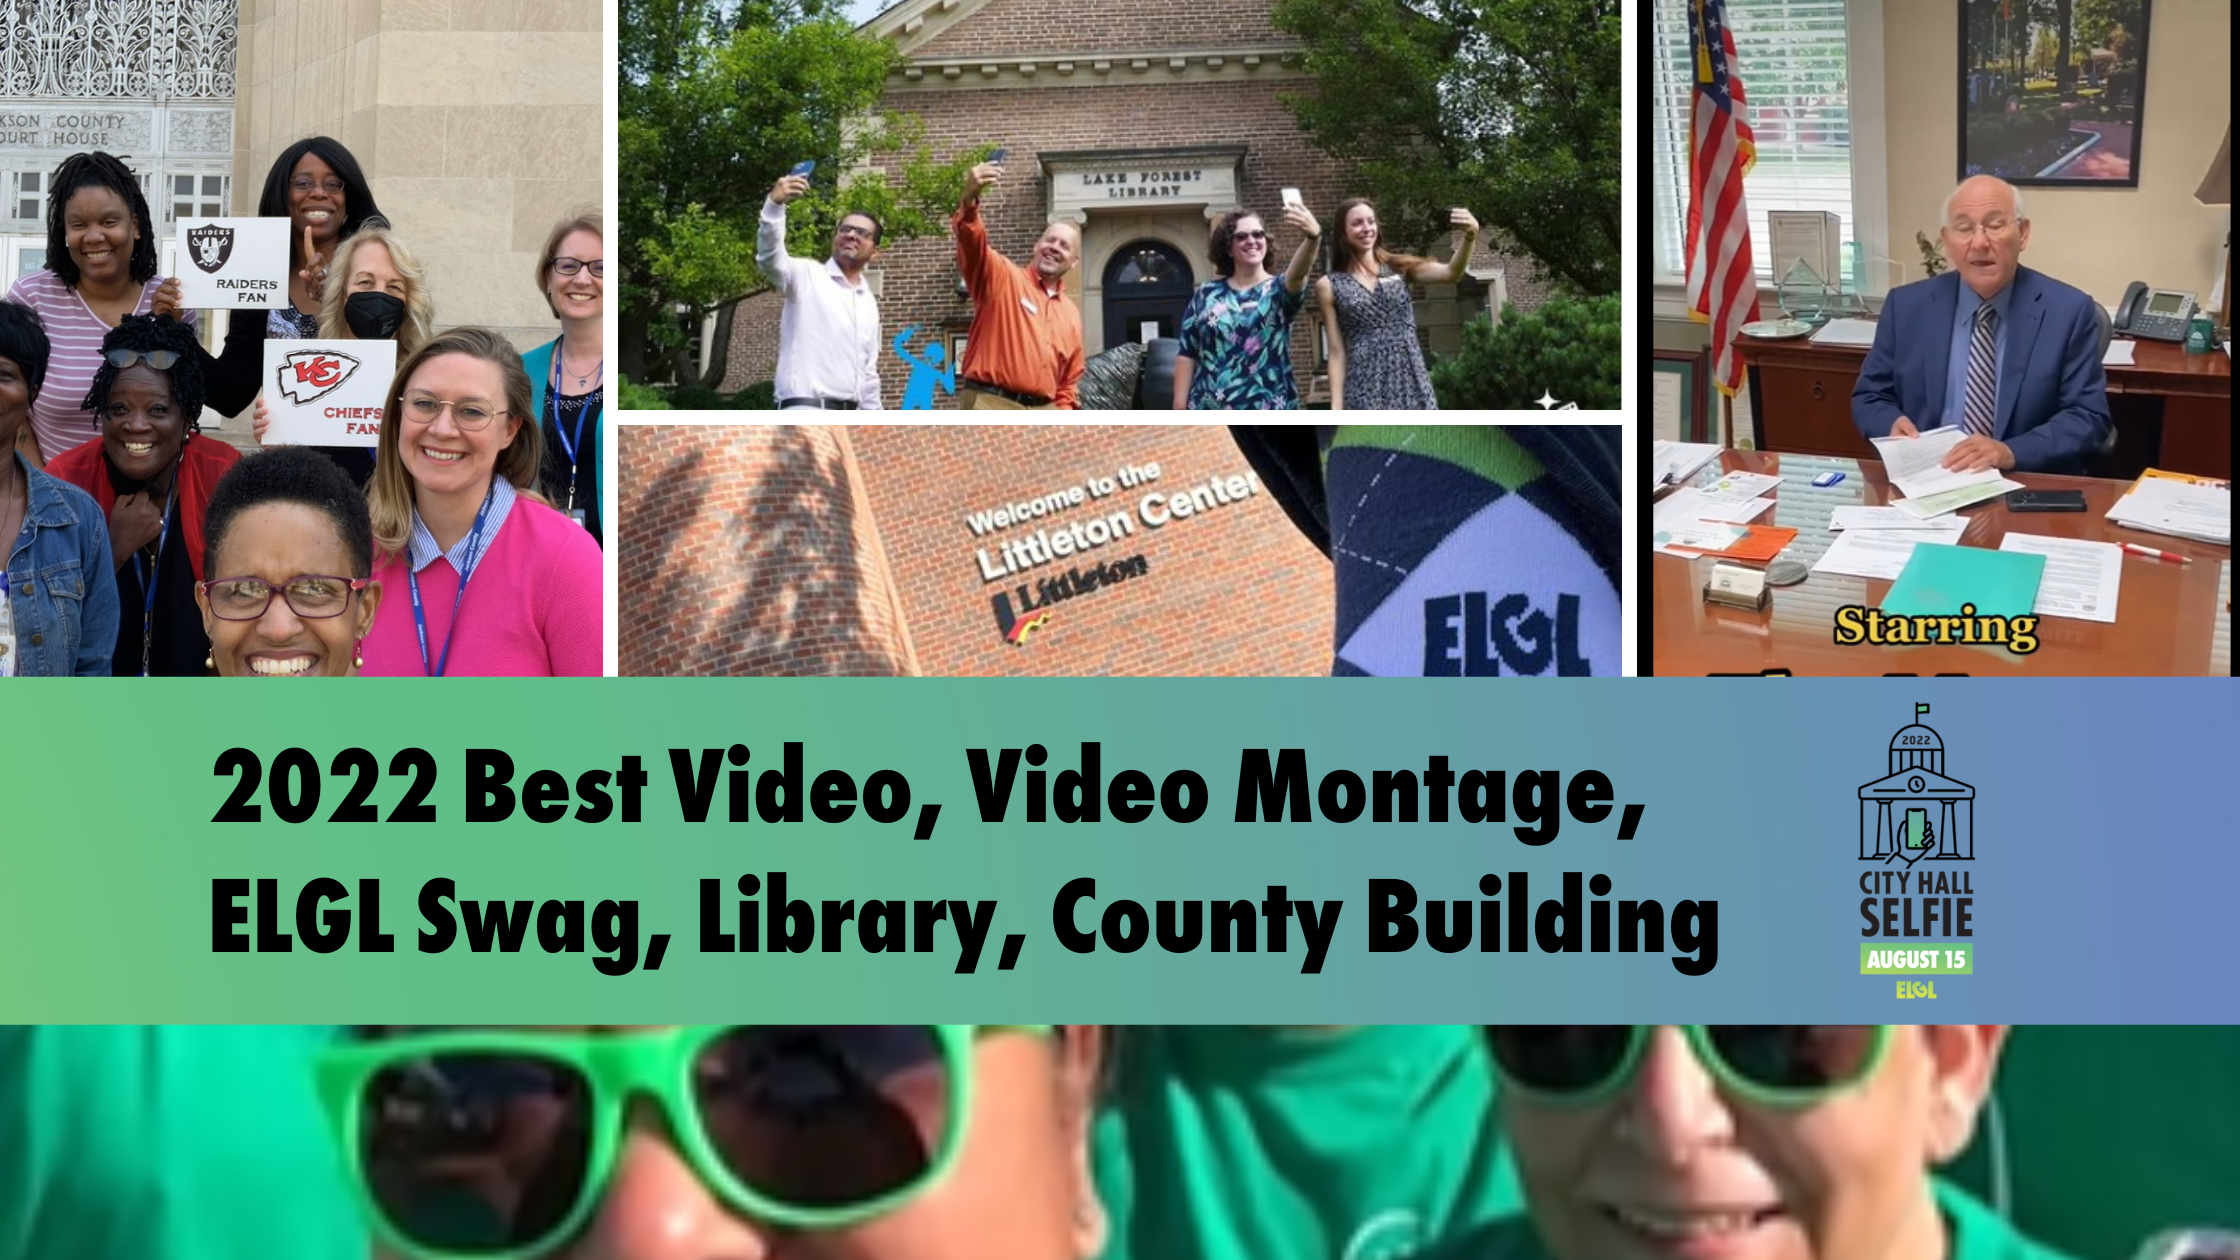 image of "2022 Best Video, Video Montage, ELGL Swag, Library, County Building"